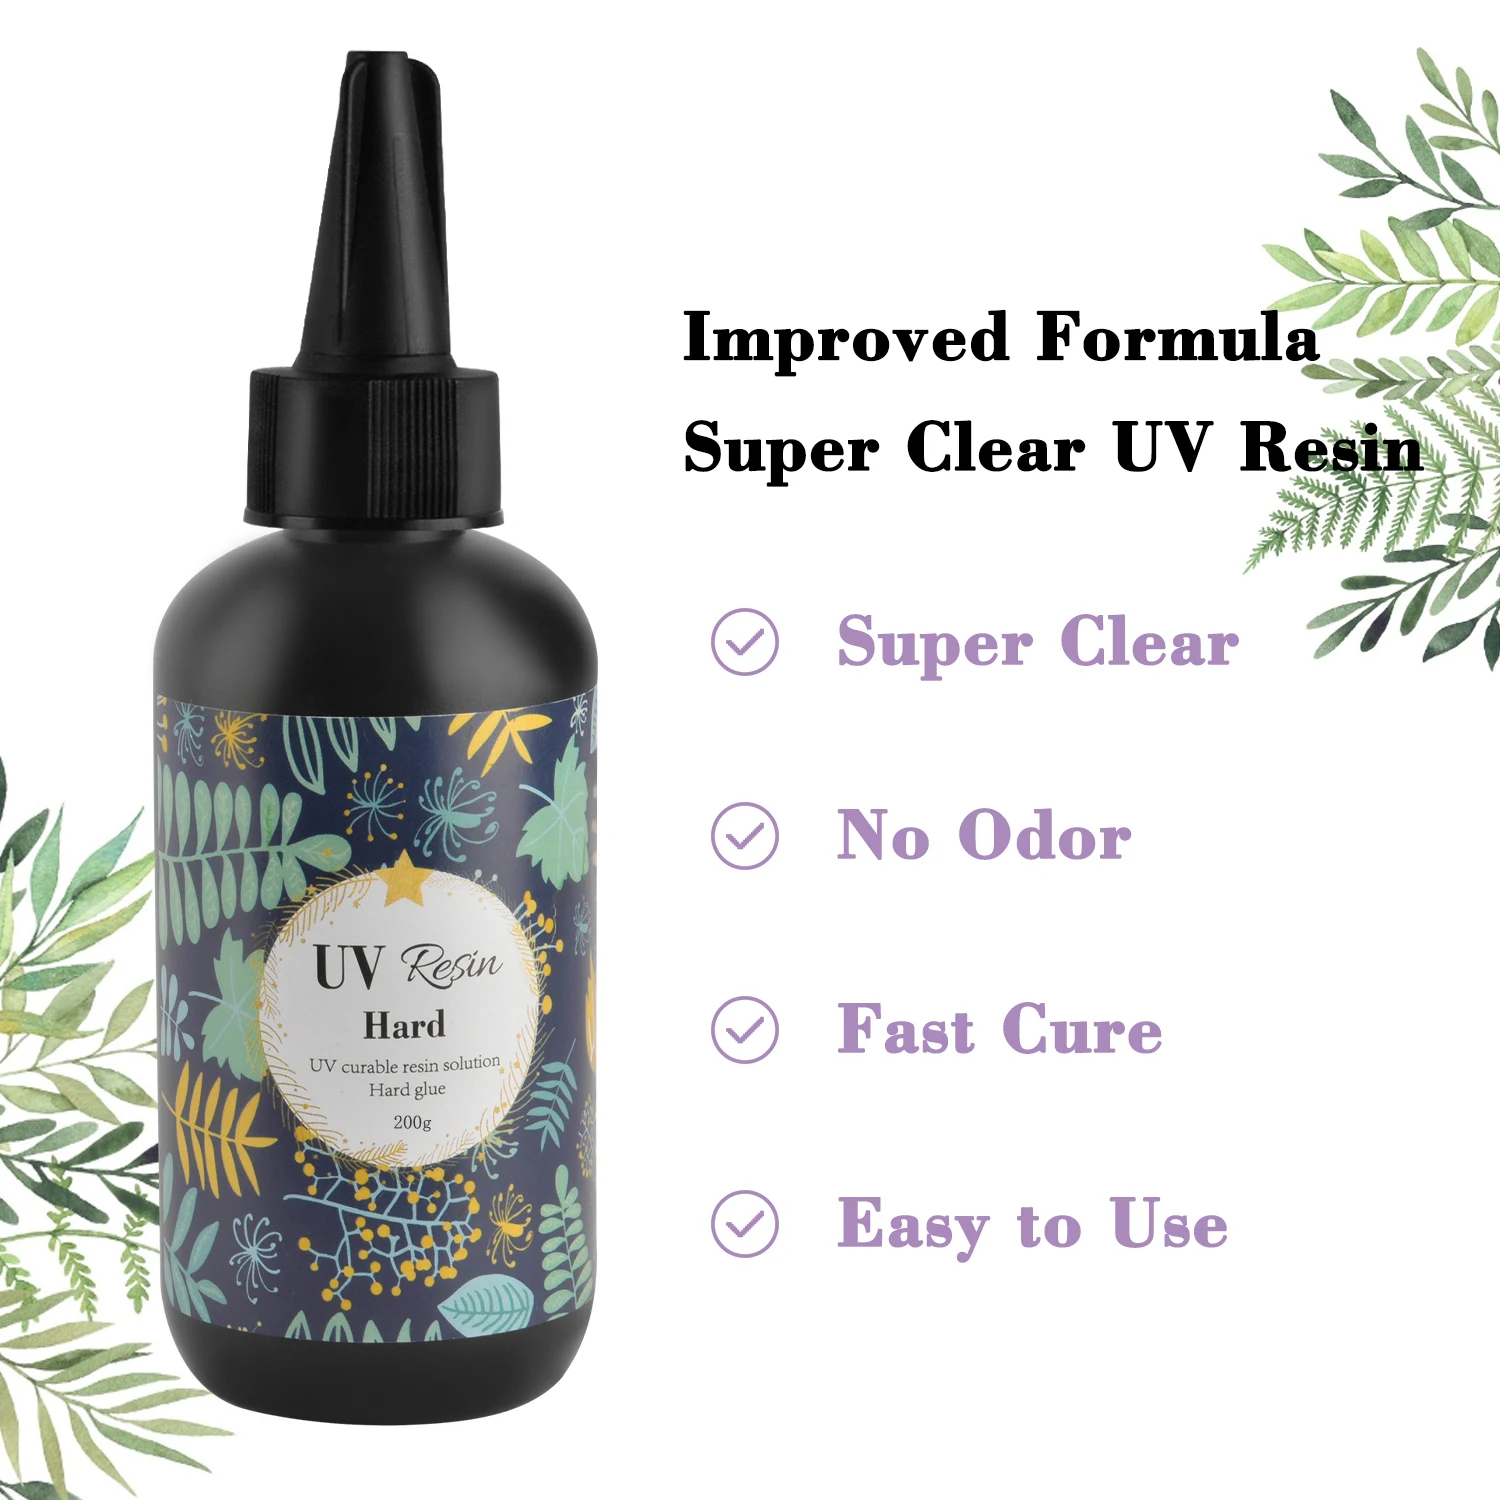 

100/200g Hard UV Resin Glue Crystal Clear Ultraviolet Curing Epoxy Resin Quick-drying Non-toxic Solar Cure DIY Jewelry Making